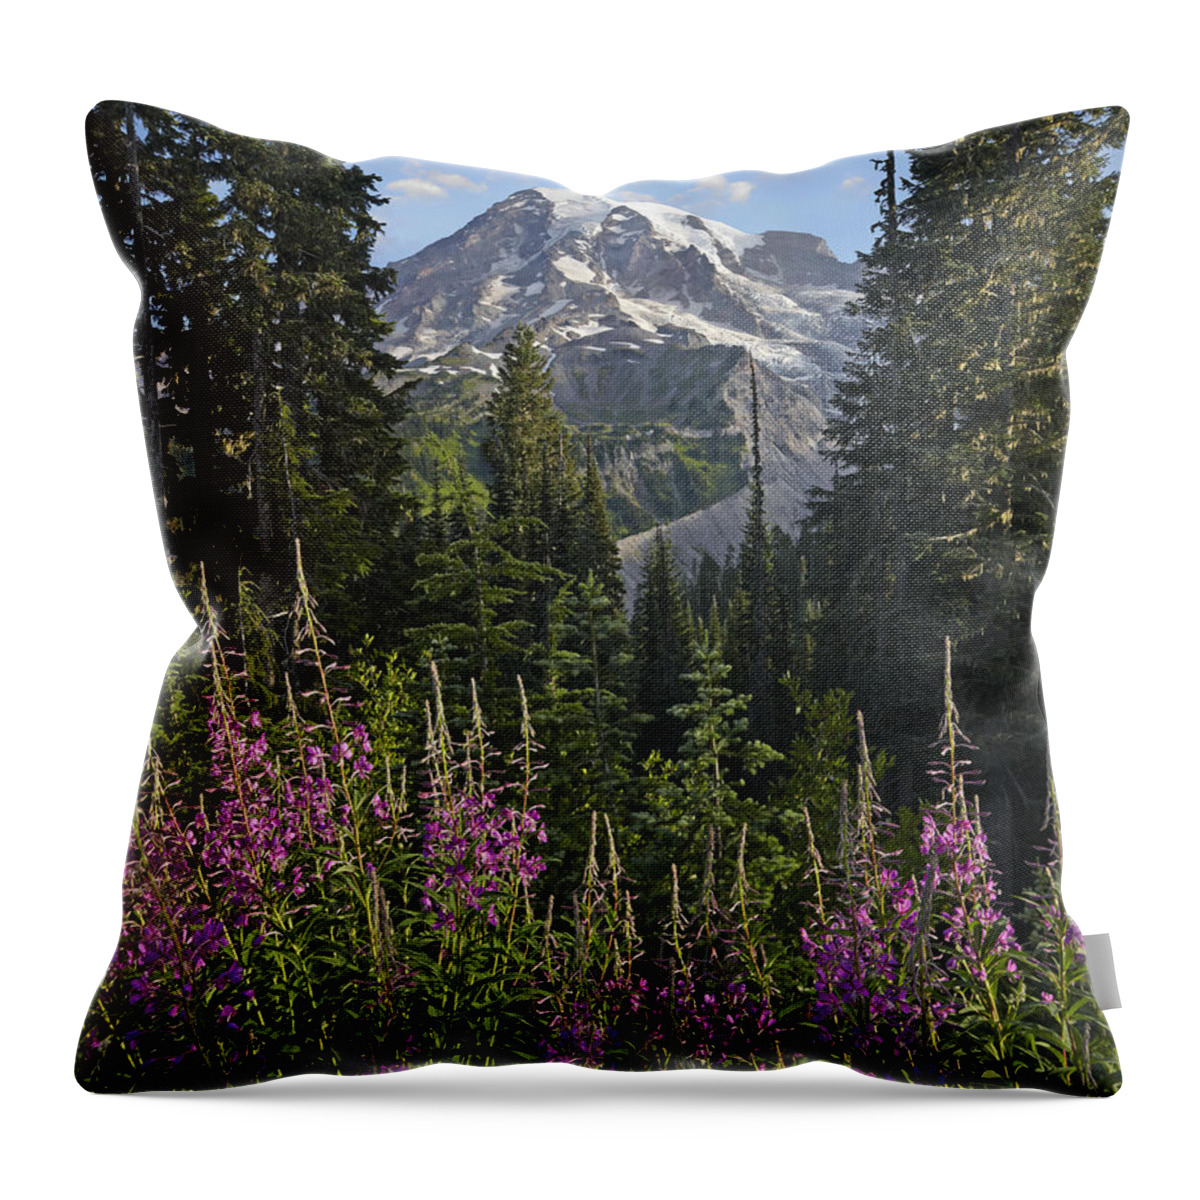 00437813 Throw Pillow featuring the photograph Fireweed Flowering And Mount Rainier by Tim Fitzharris